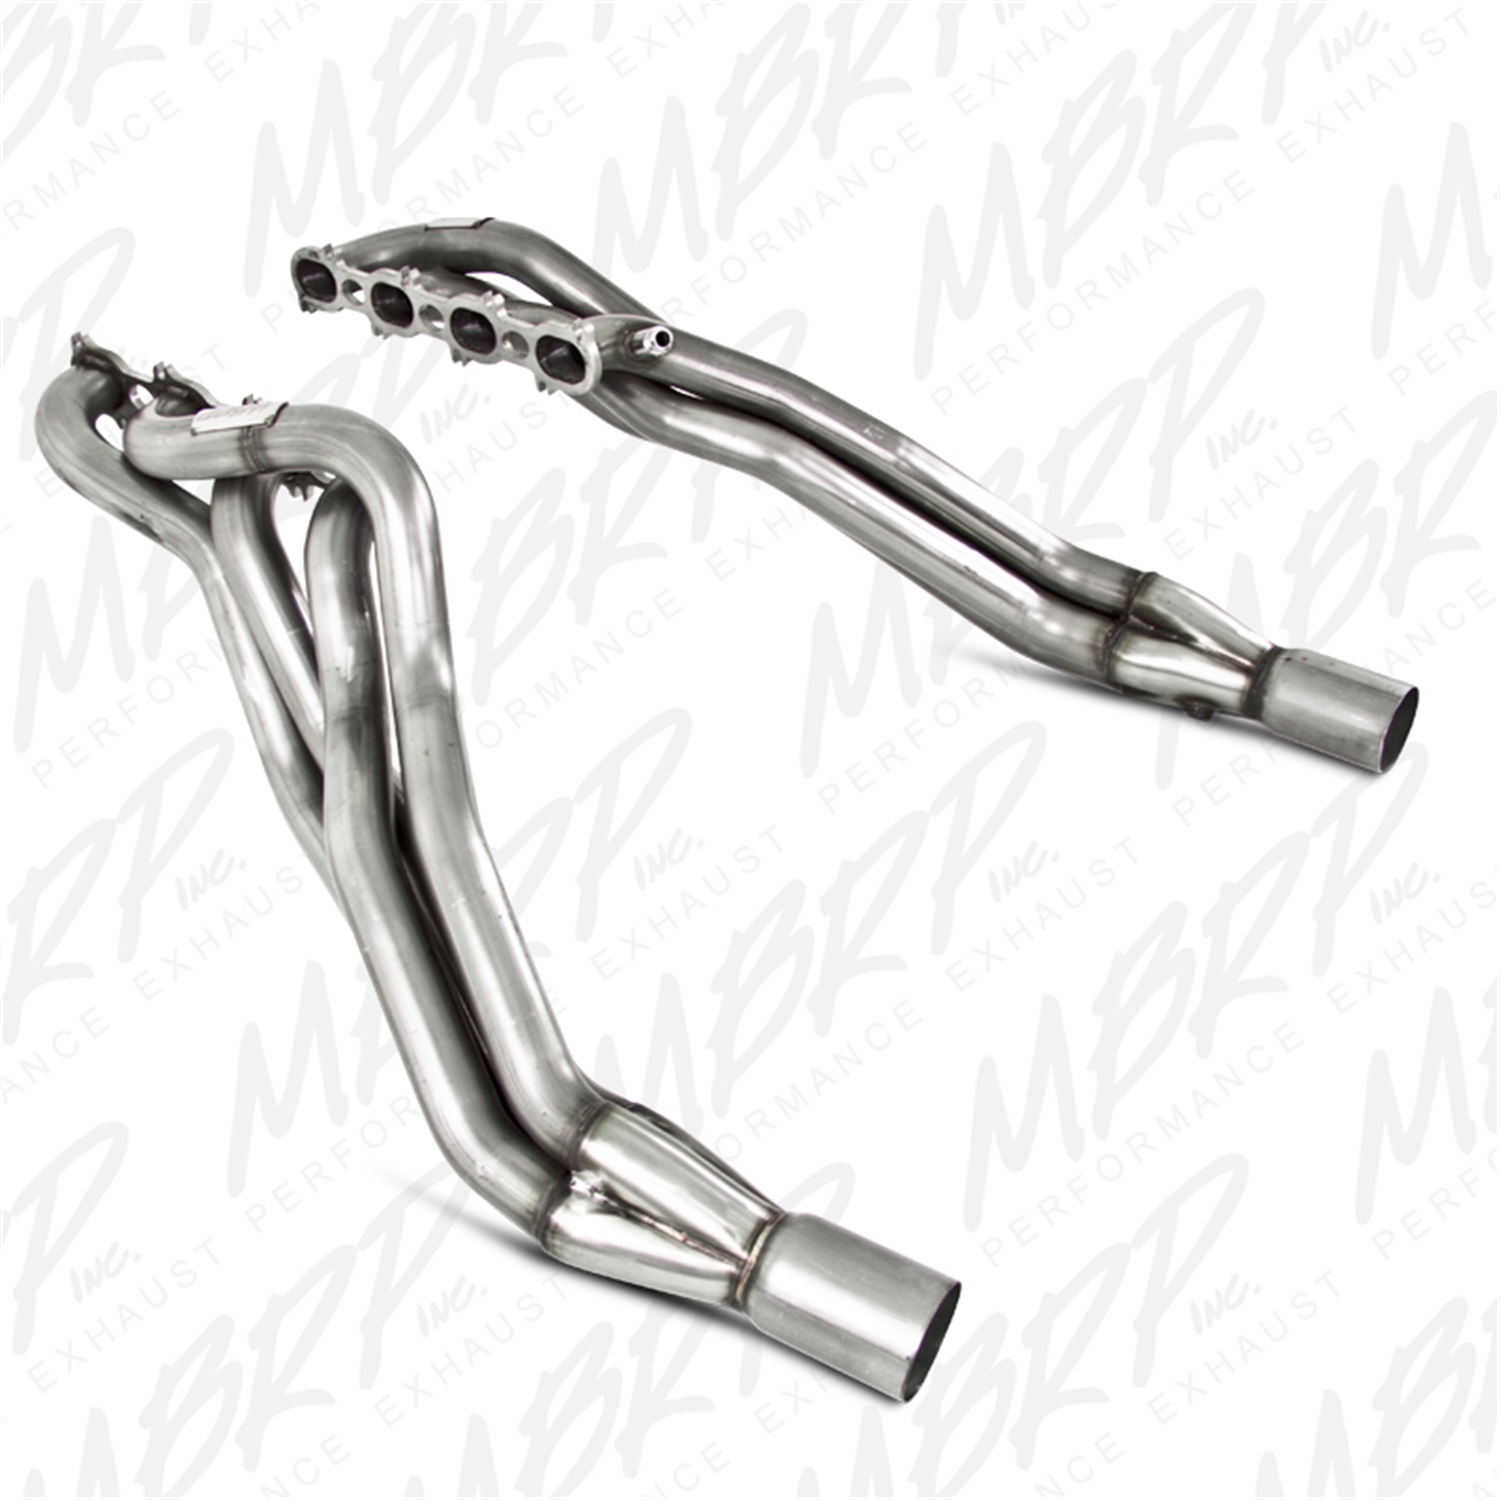 MBRP Exhaust MBRP Exhaust S7228304 Pro Series; Long Tube Header Fits 11-12 Mustang